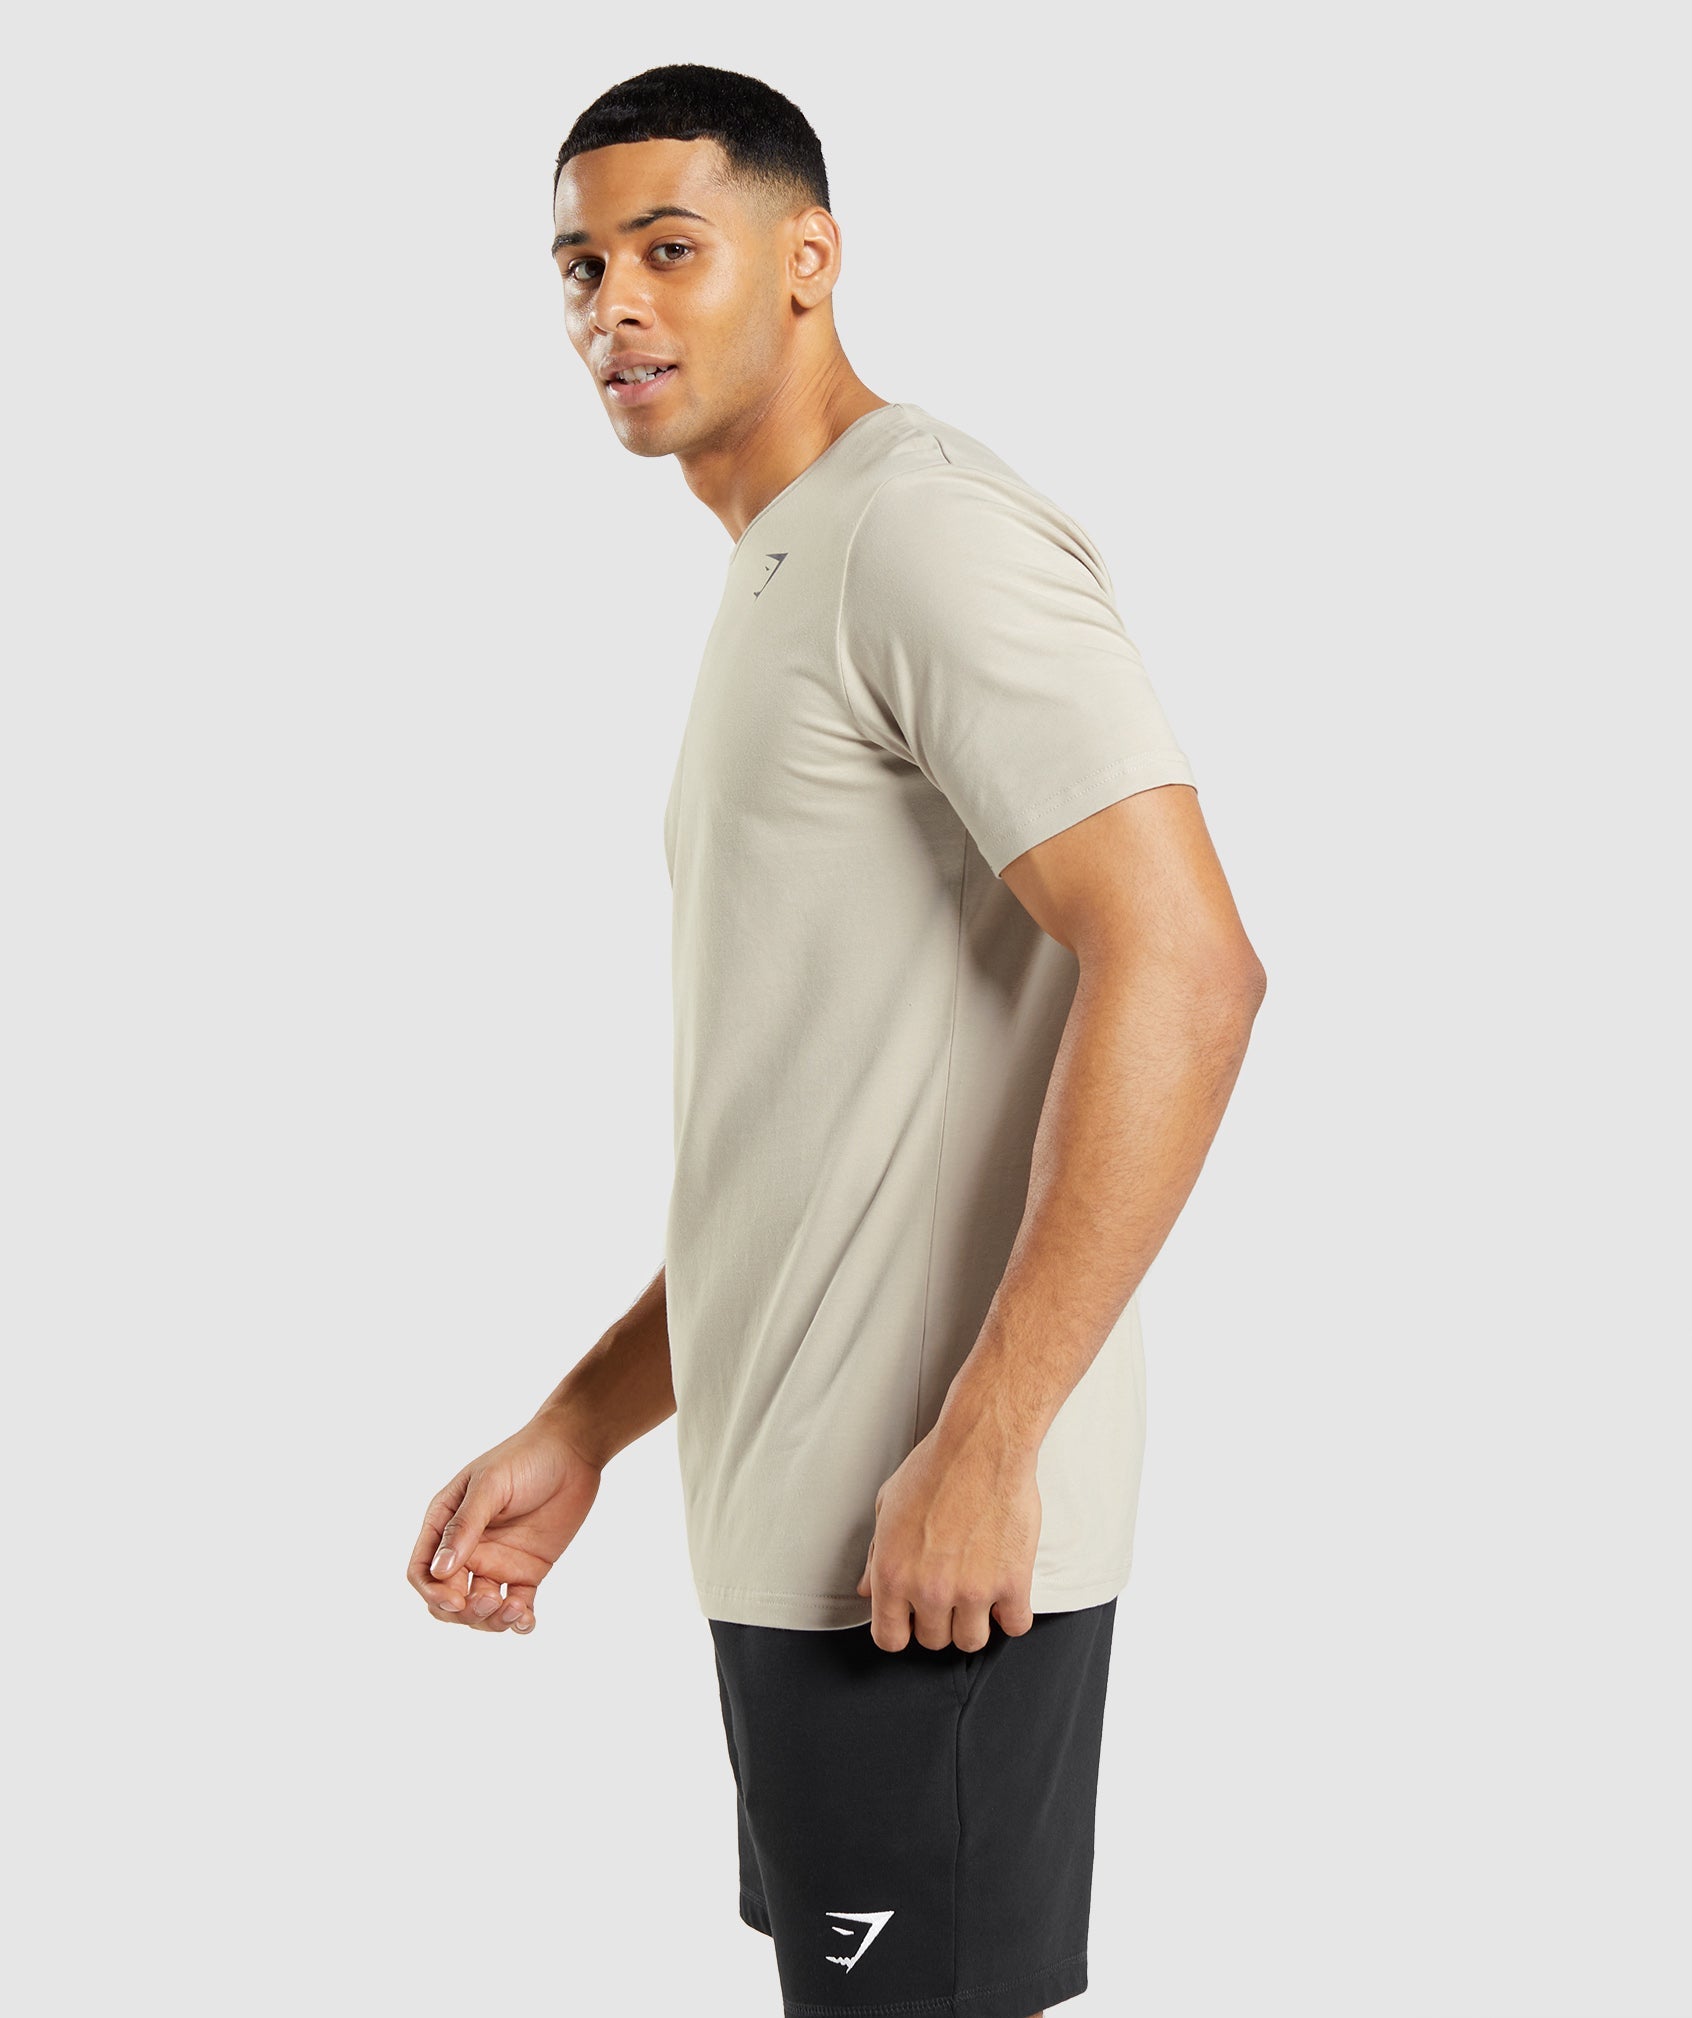 Essential T-Shirt in Pebble Grey - view 3